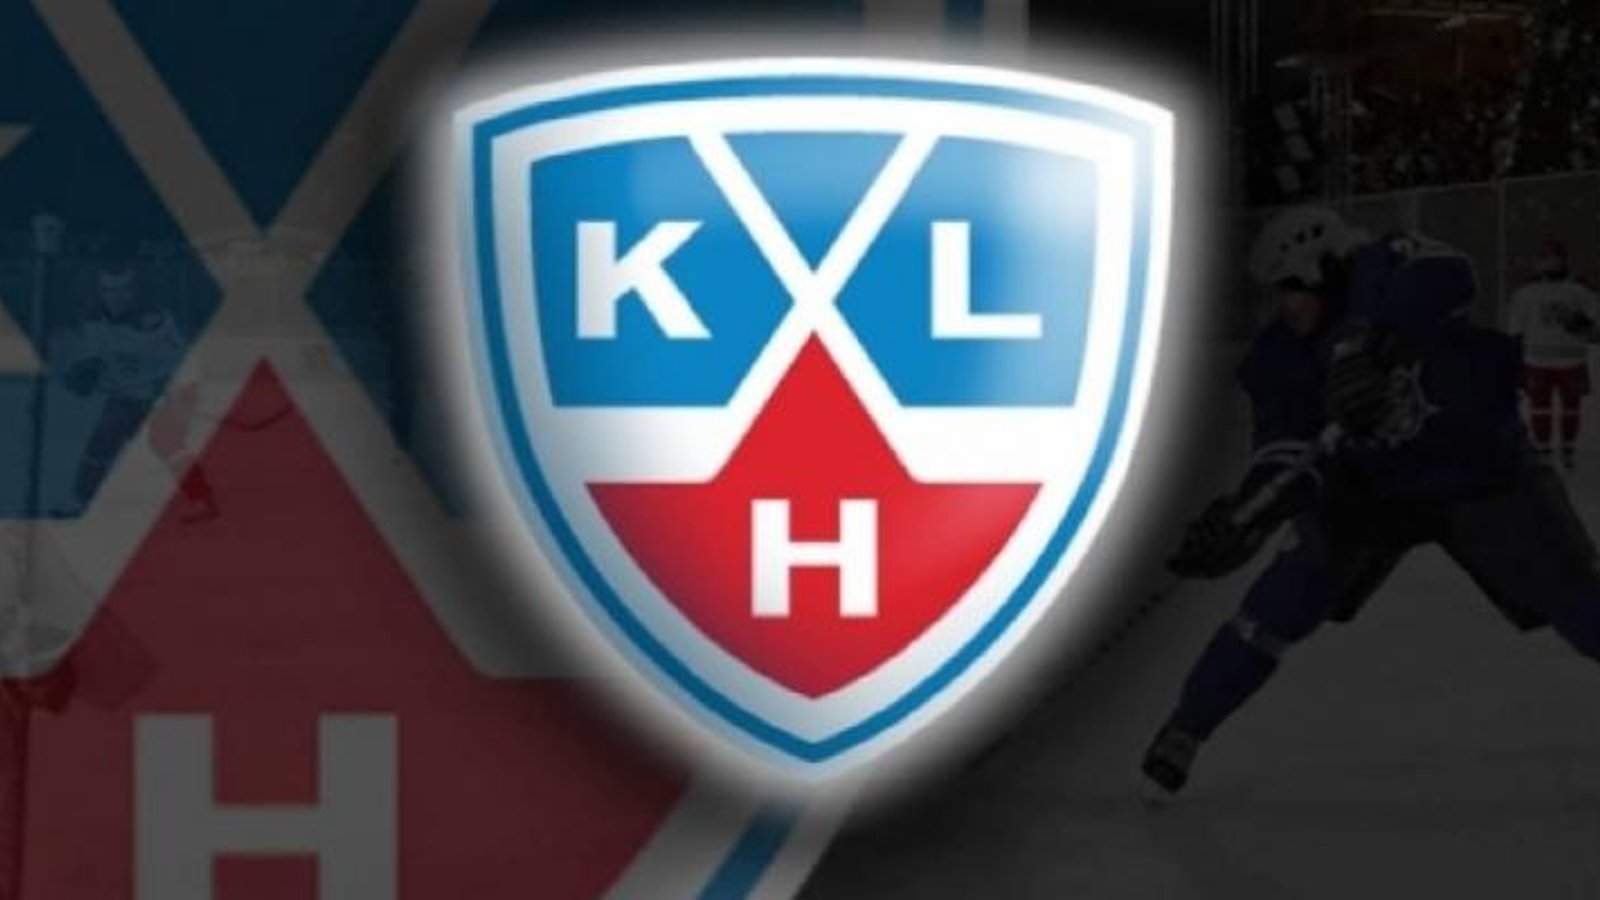 Breaking: KHL reportedly expanding to major Eruopean city.